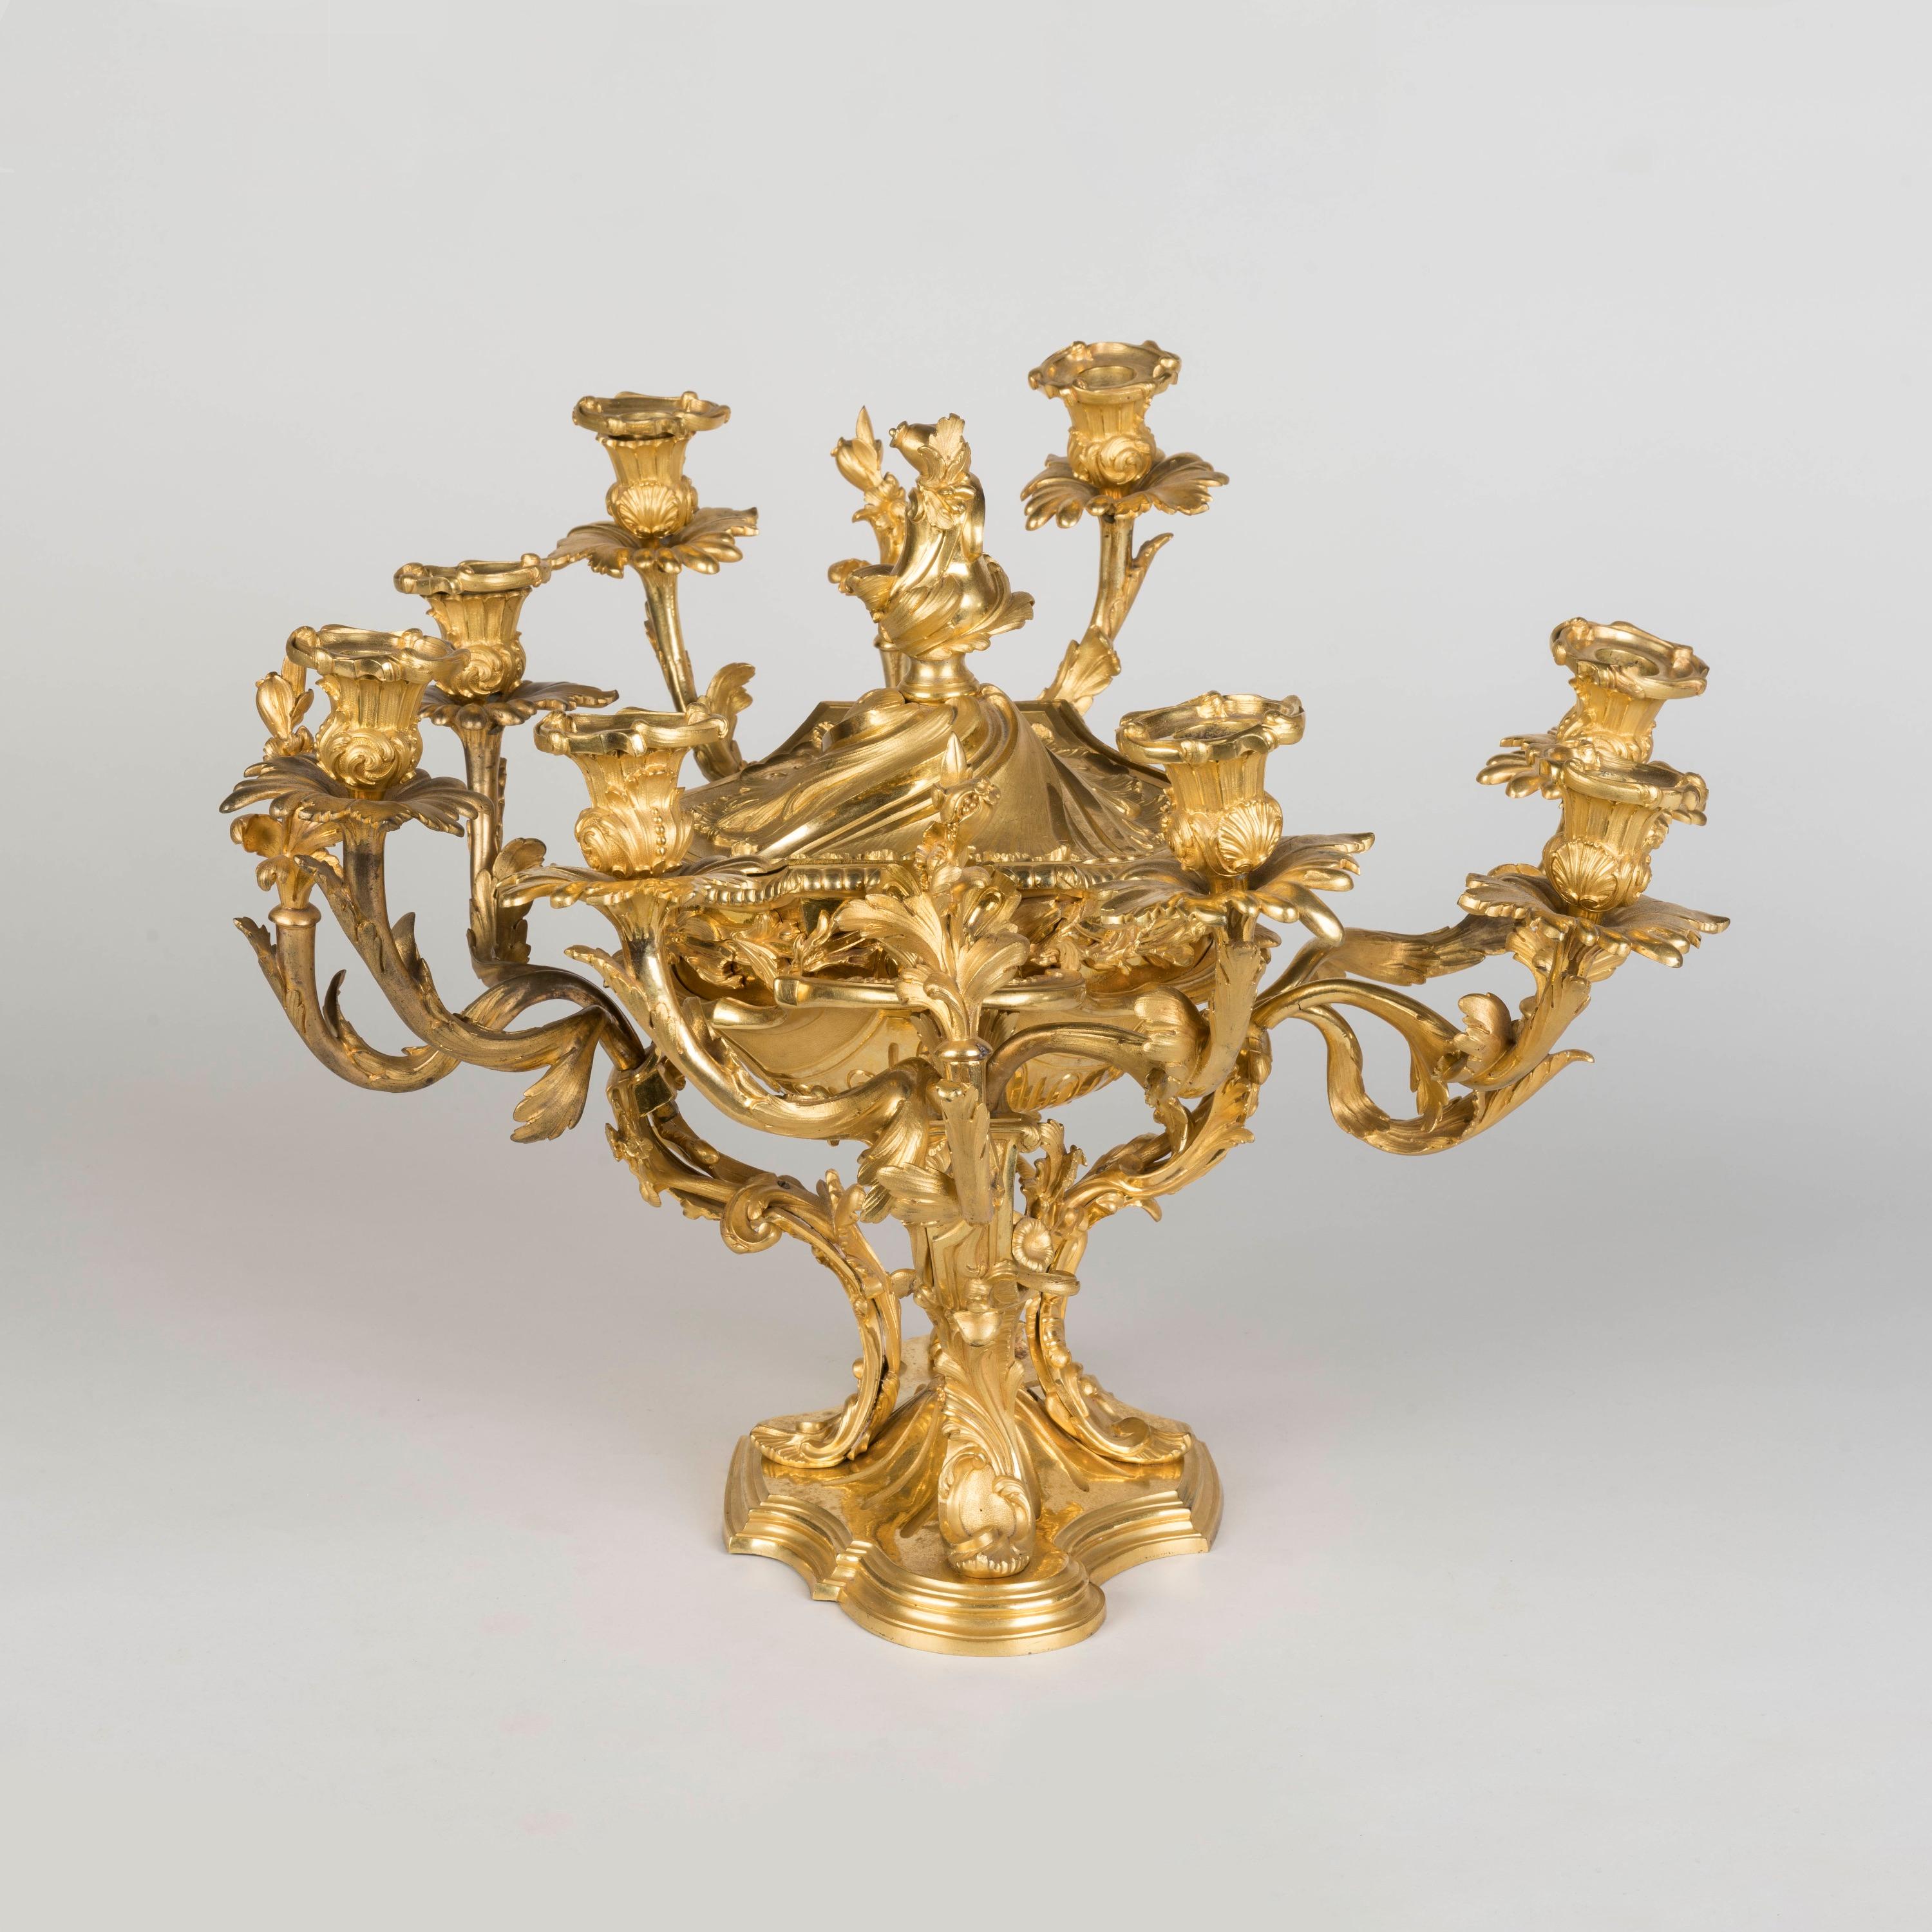 19th Century French Gilded Bronze Rococo Centrepiece For Sale 1